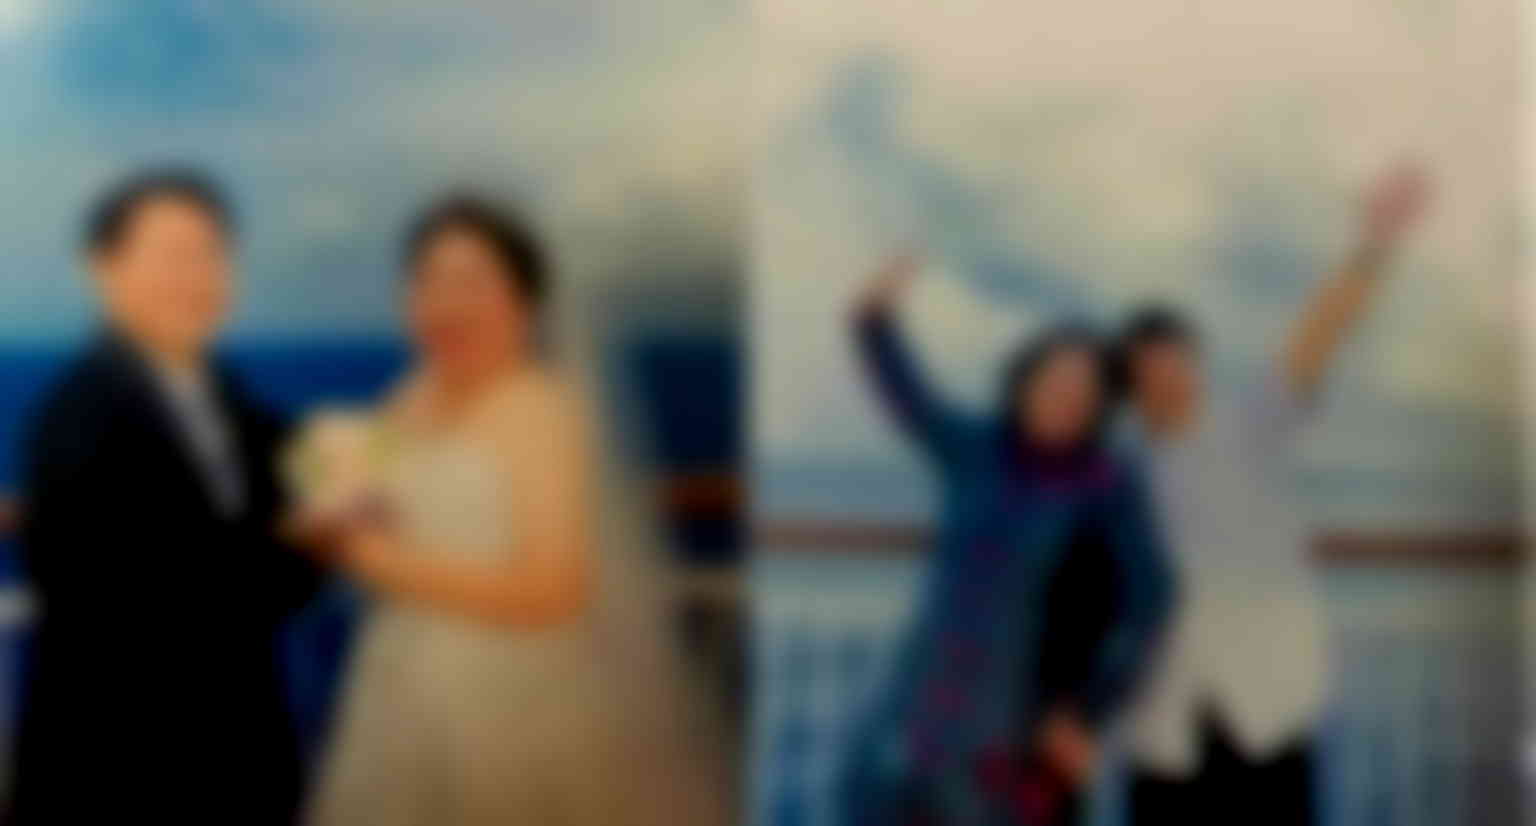 Chinese Couple Pays $500 for Hideous ‘Professional’ Wedding Photoshoot